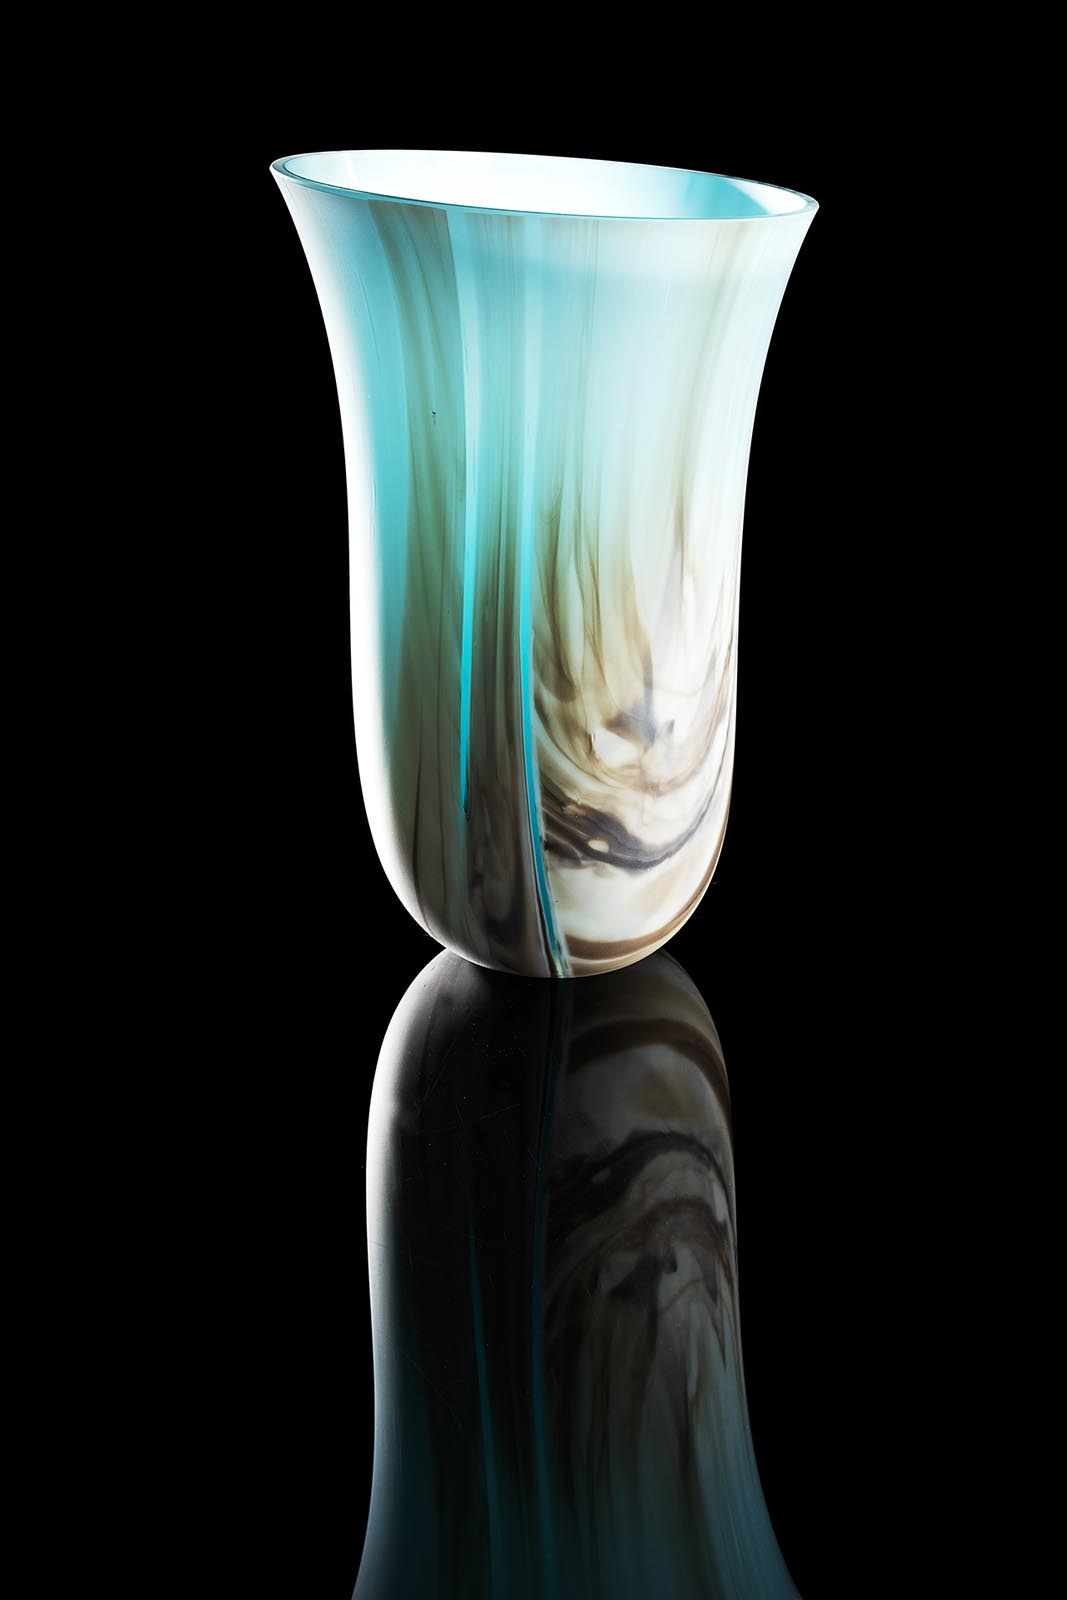 Scandza collection glass vessel - contemporary glassware hand made in Ireland by Keith Sheppard Glass Artistry, Northern Ireland